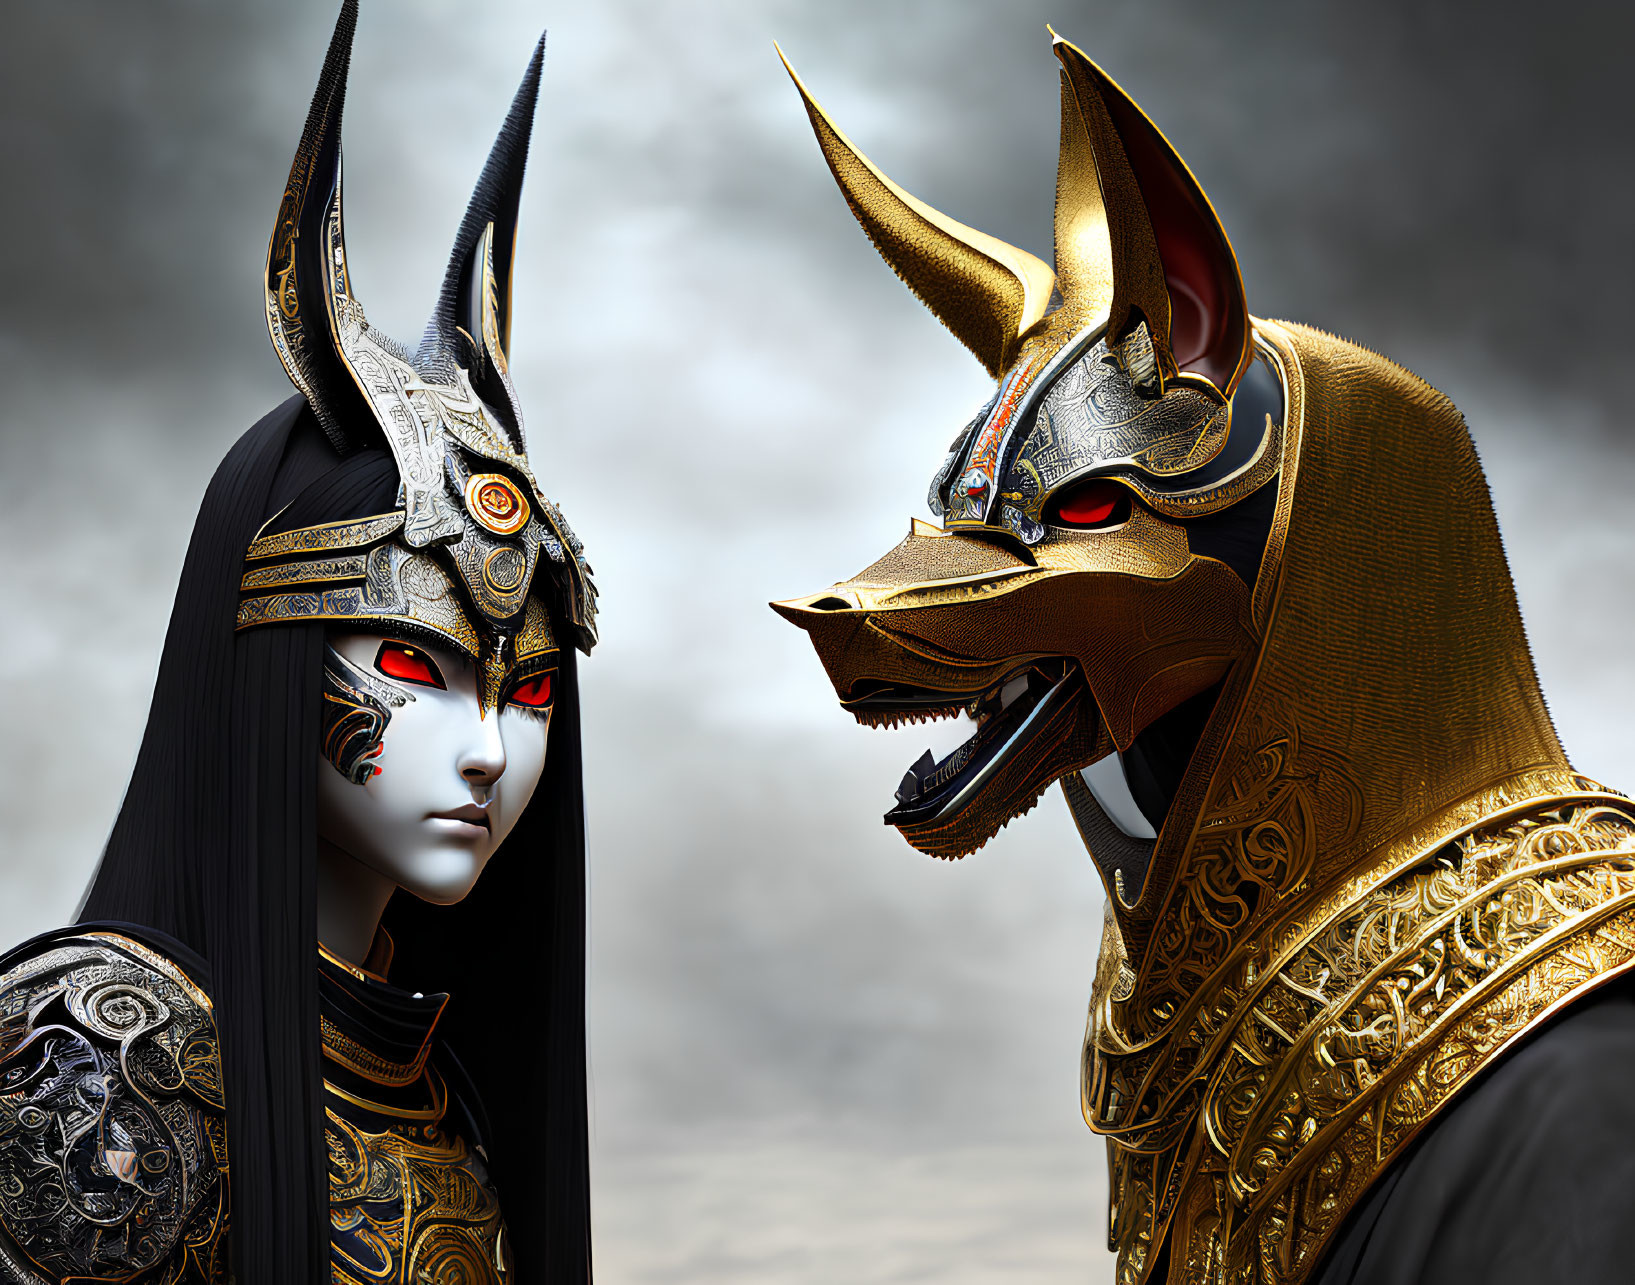 Intricate armor and masks on figures in golden wolf and kabuki-like styles against cloudy backdrop